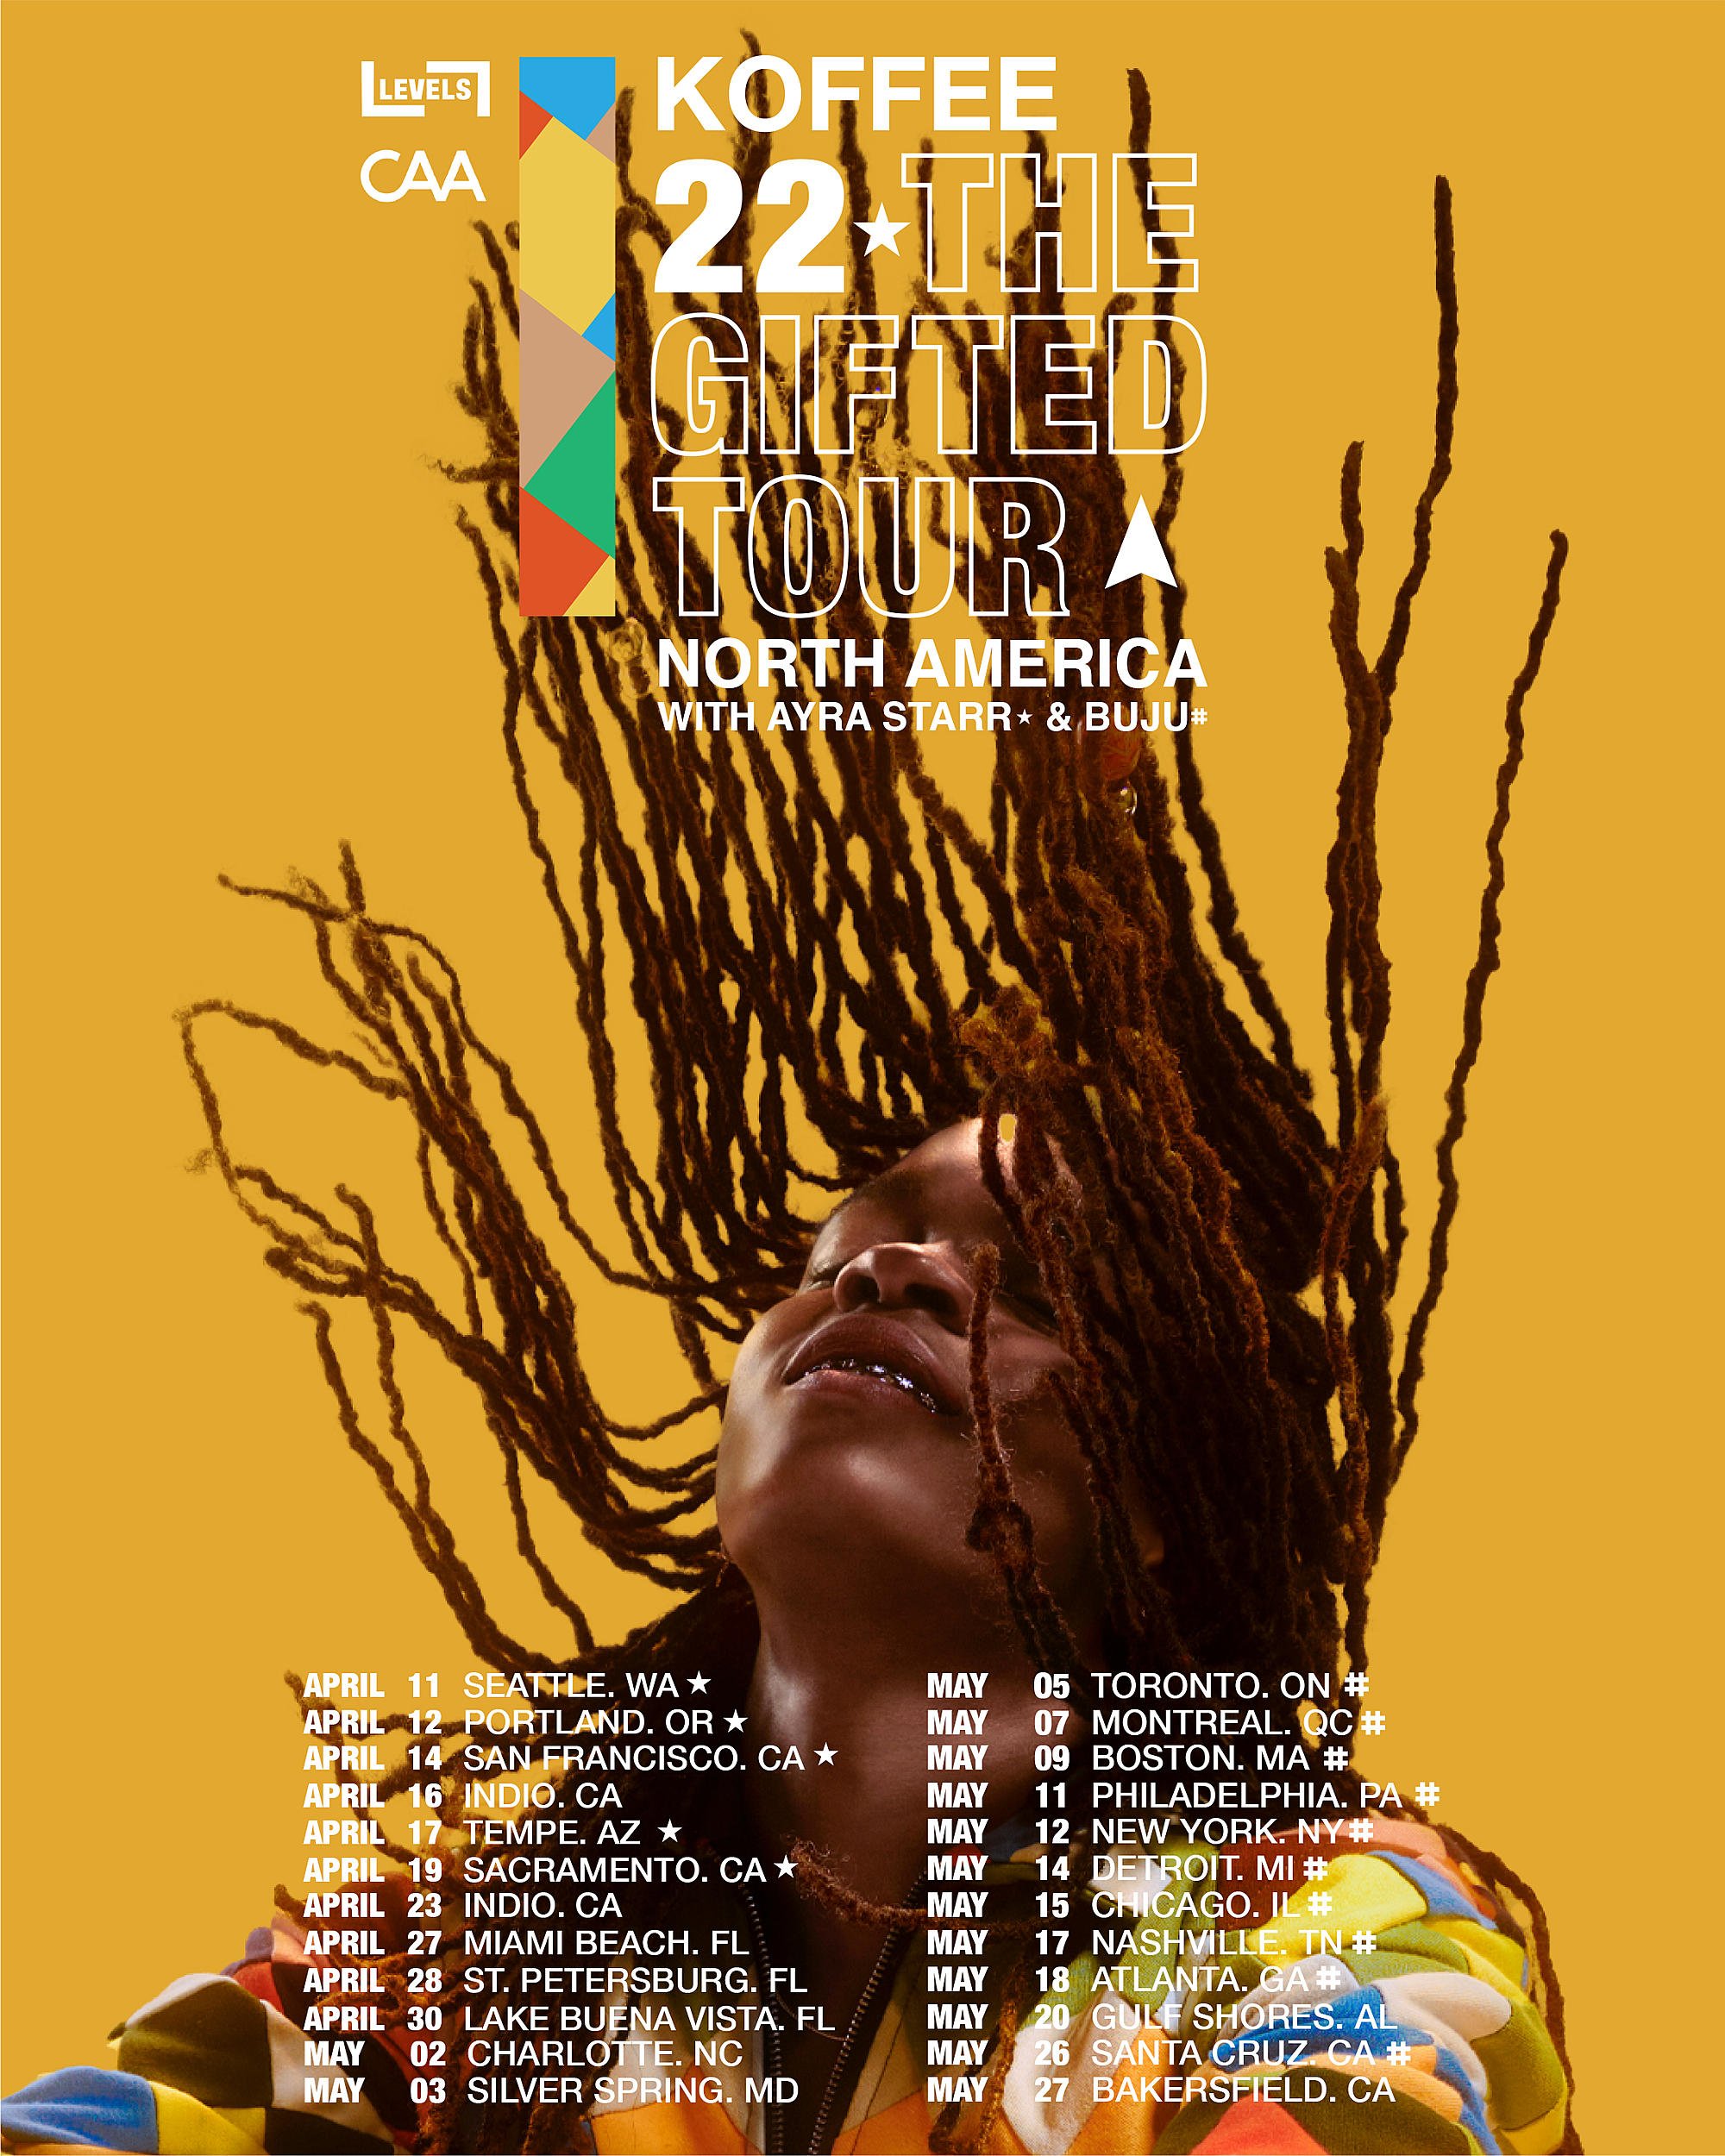 Koffee Announces North American tour with Buju & Ayra Starr.